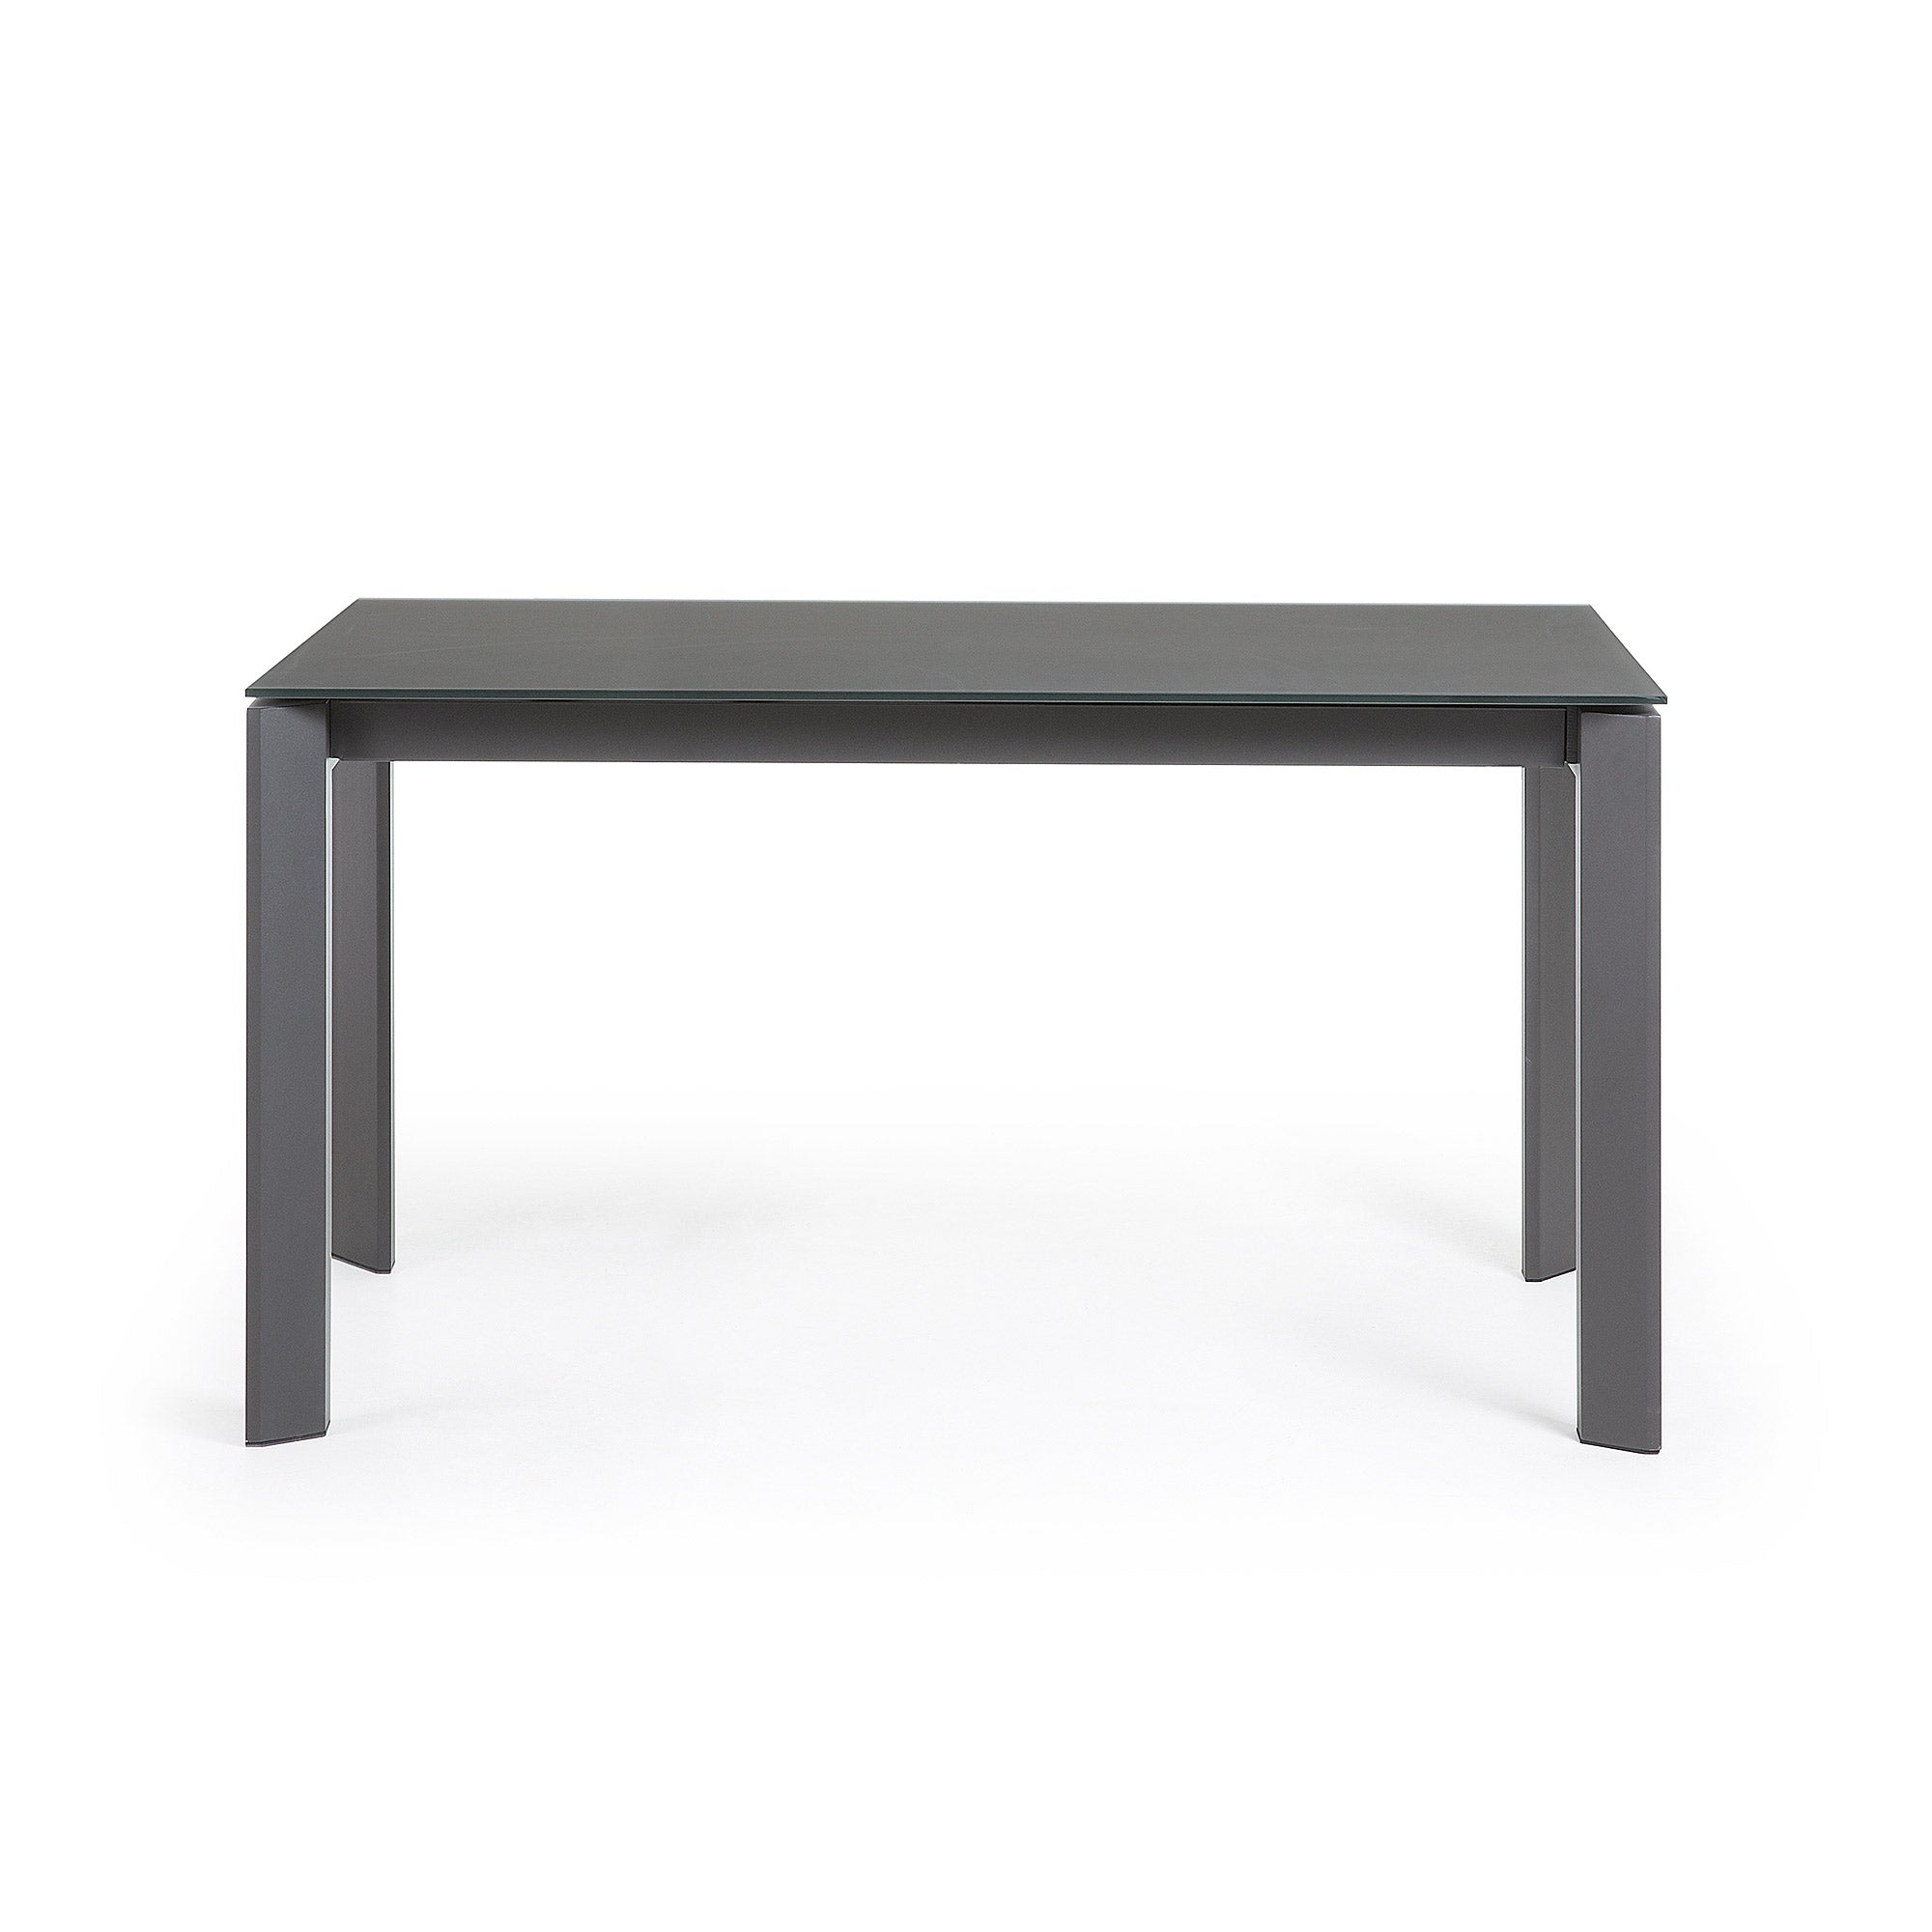 Axis extendable table in grey glass with steel legs in a dark grey finish, 140 (200) cm